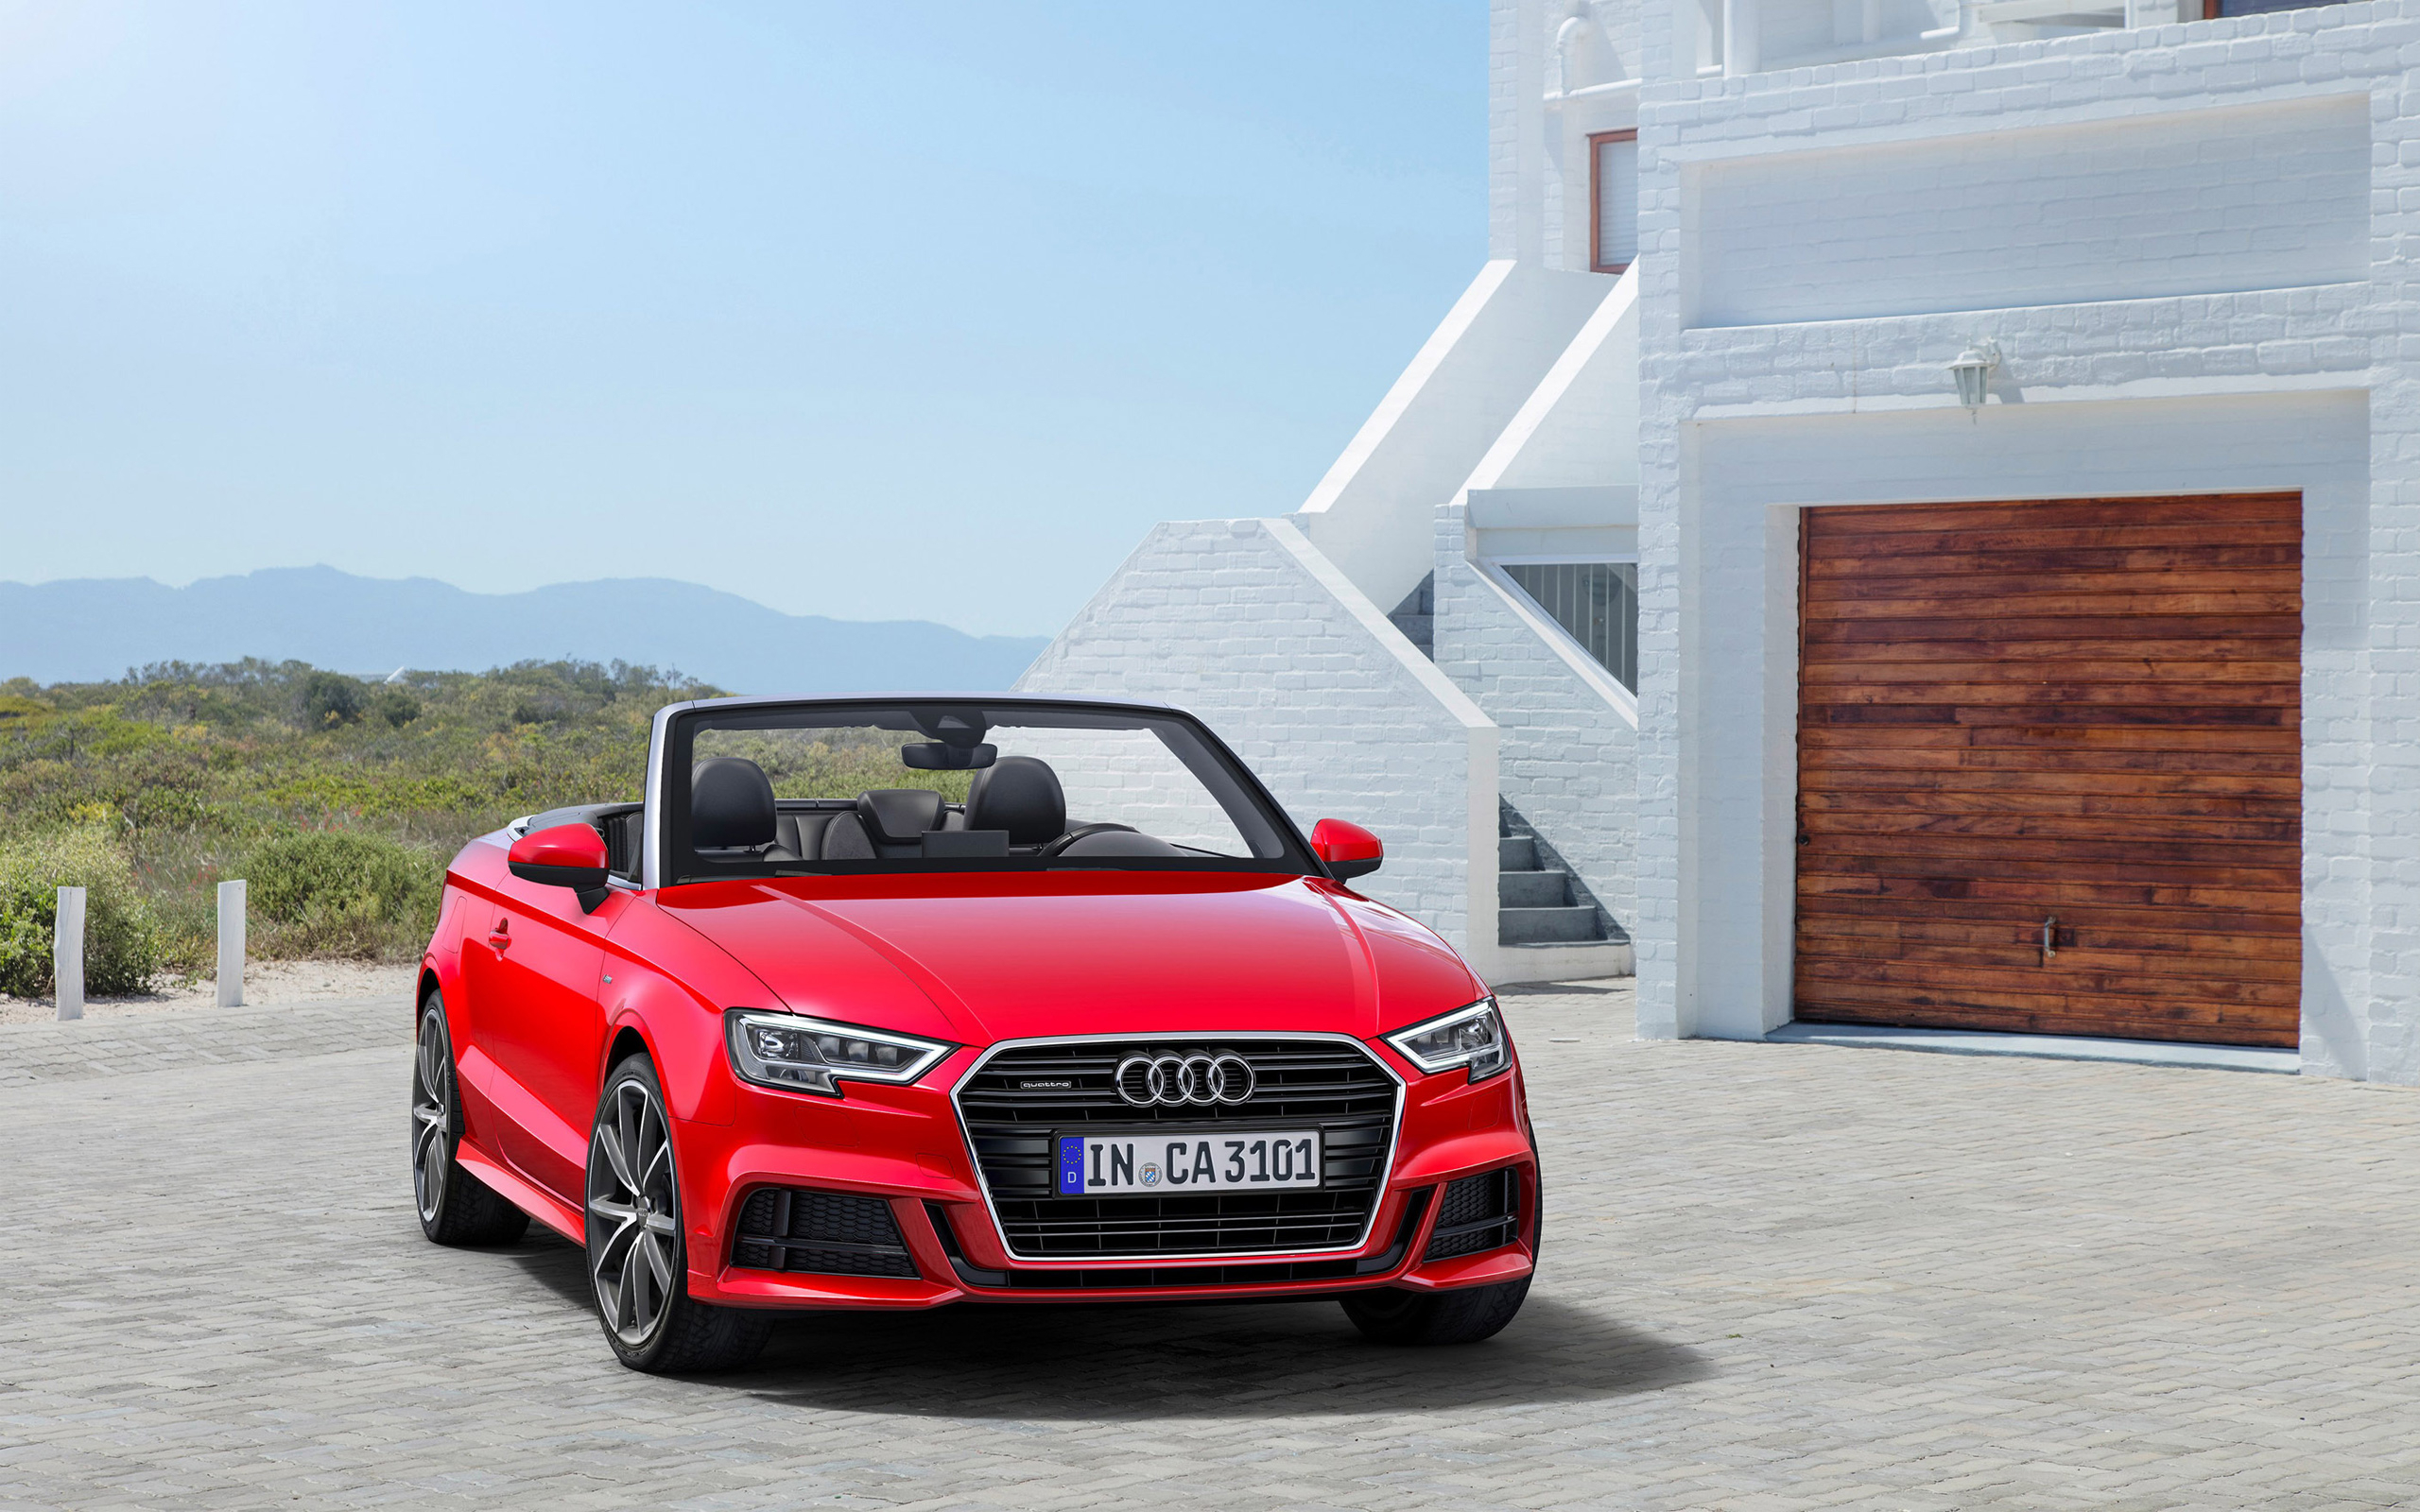 Audi S3 Cabriolet Wallpaper Full HD Wantingseed